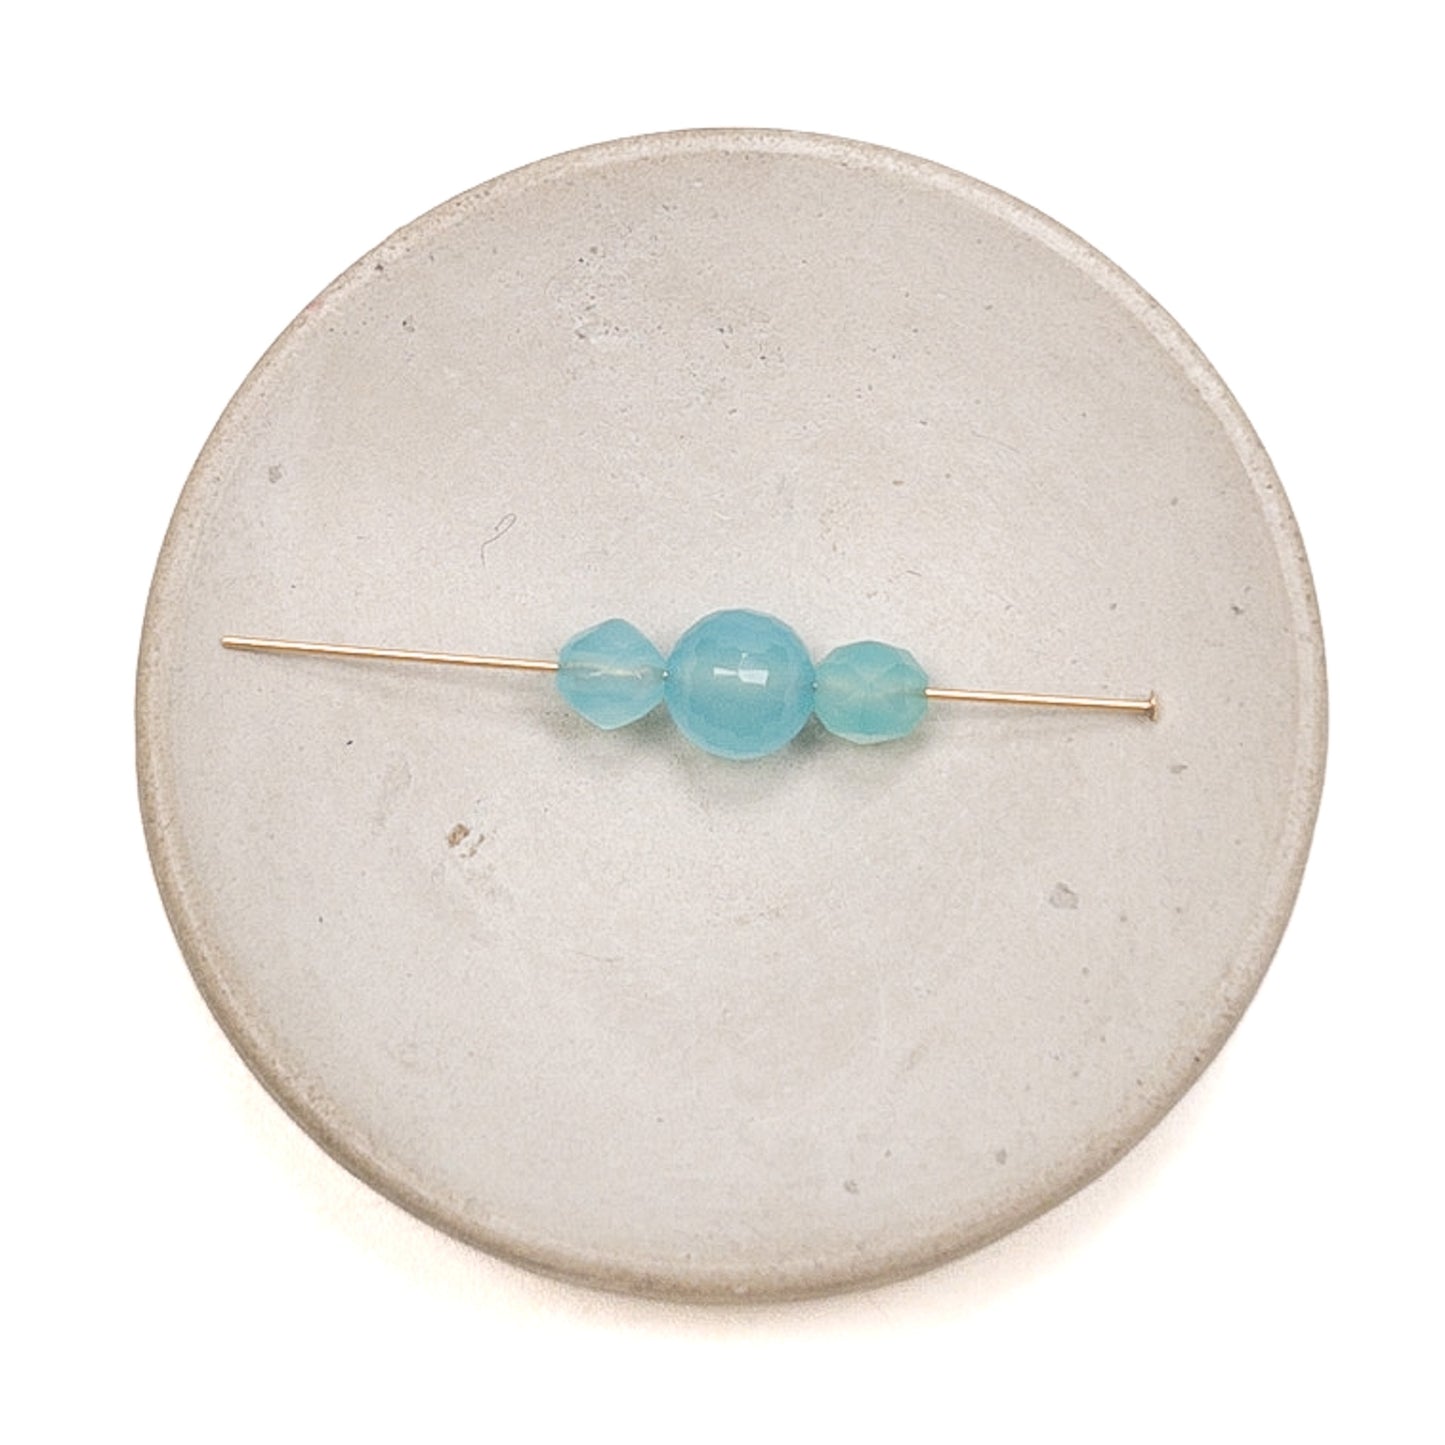 Blue Chalcedony Faceted Round Gemstone Bead Mix - 3 pcs.